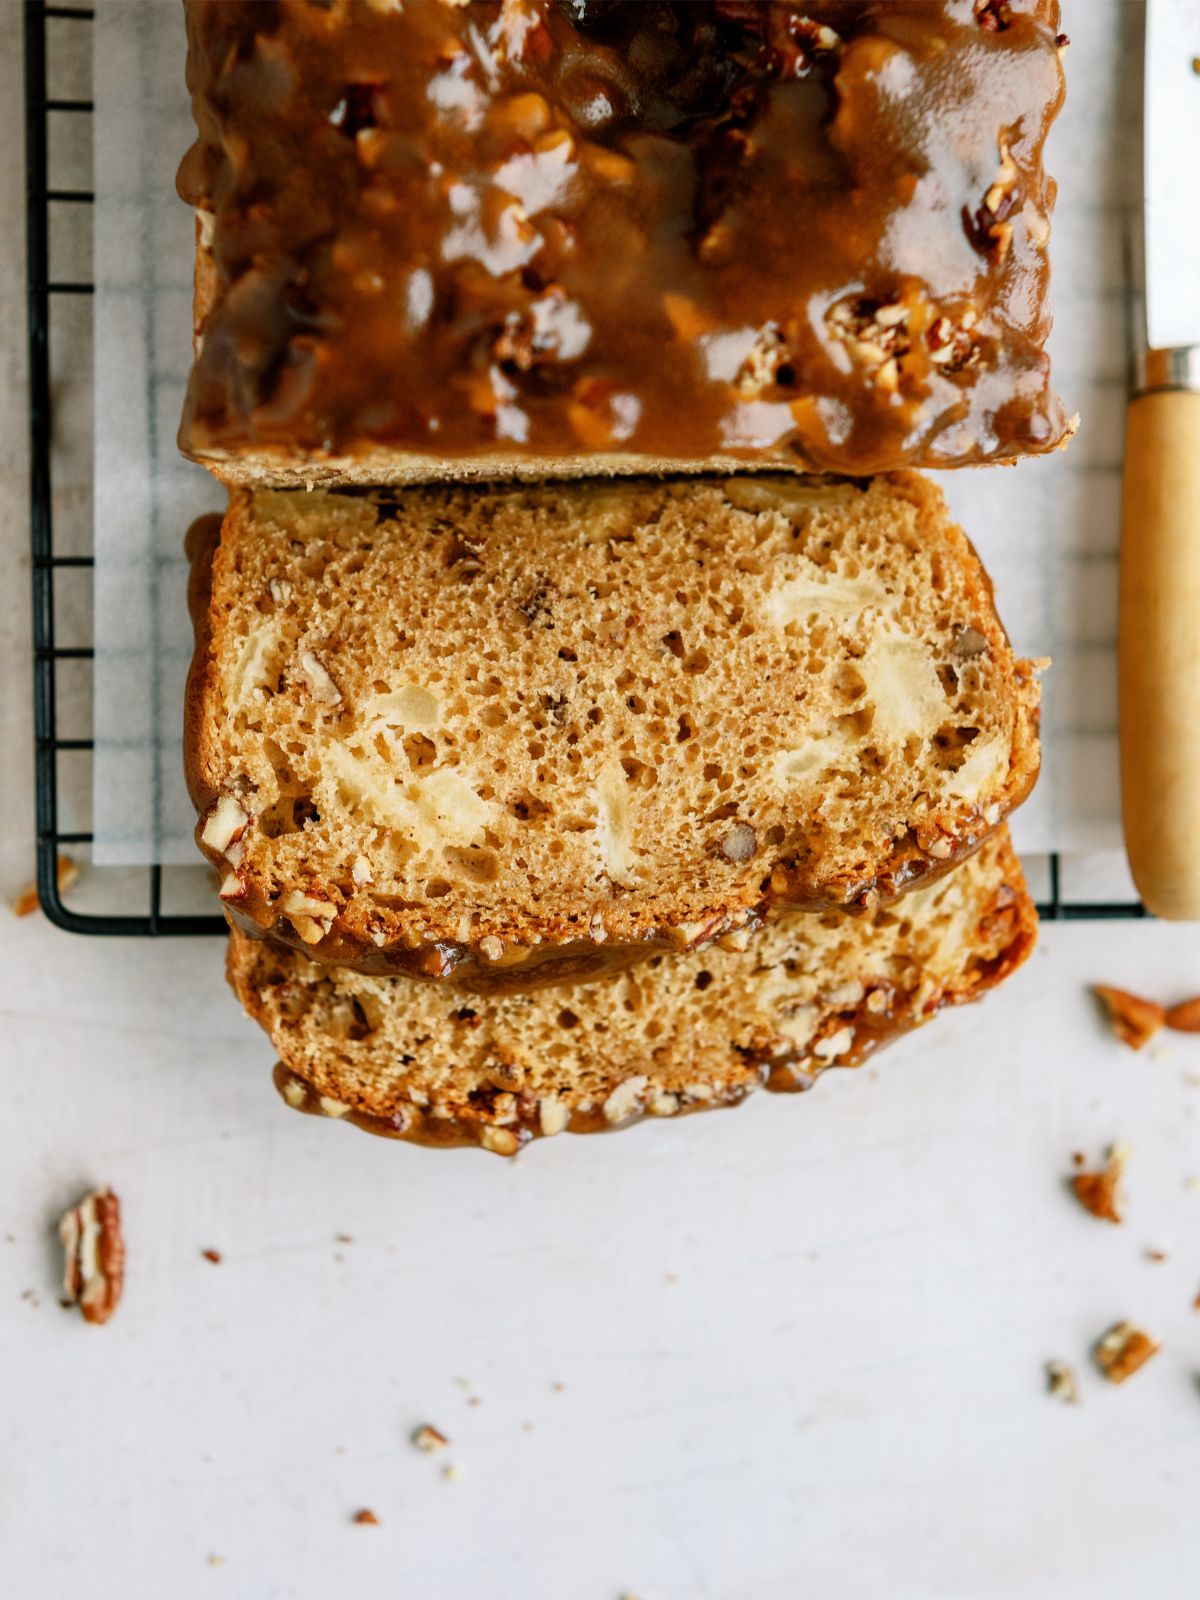 Top view of Apple Praline Bread with some of the loaf sliced